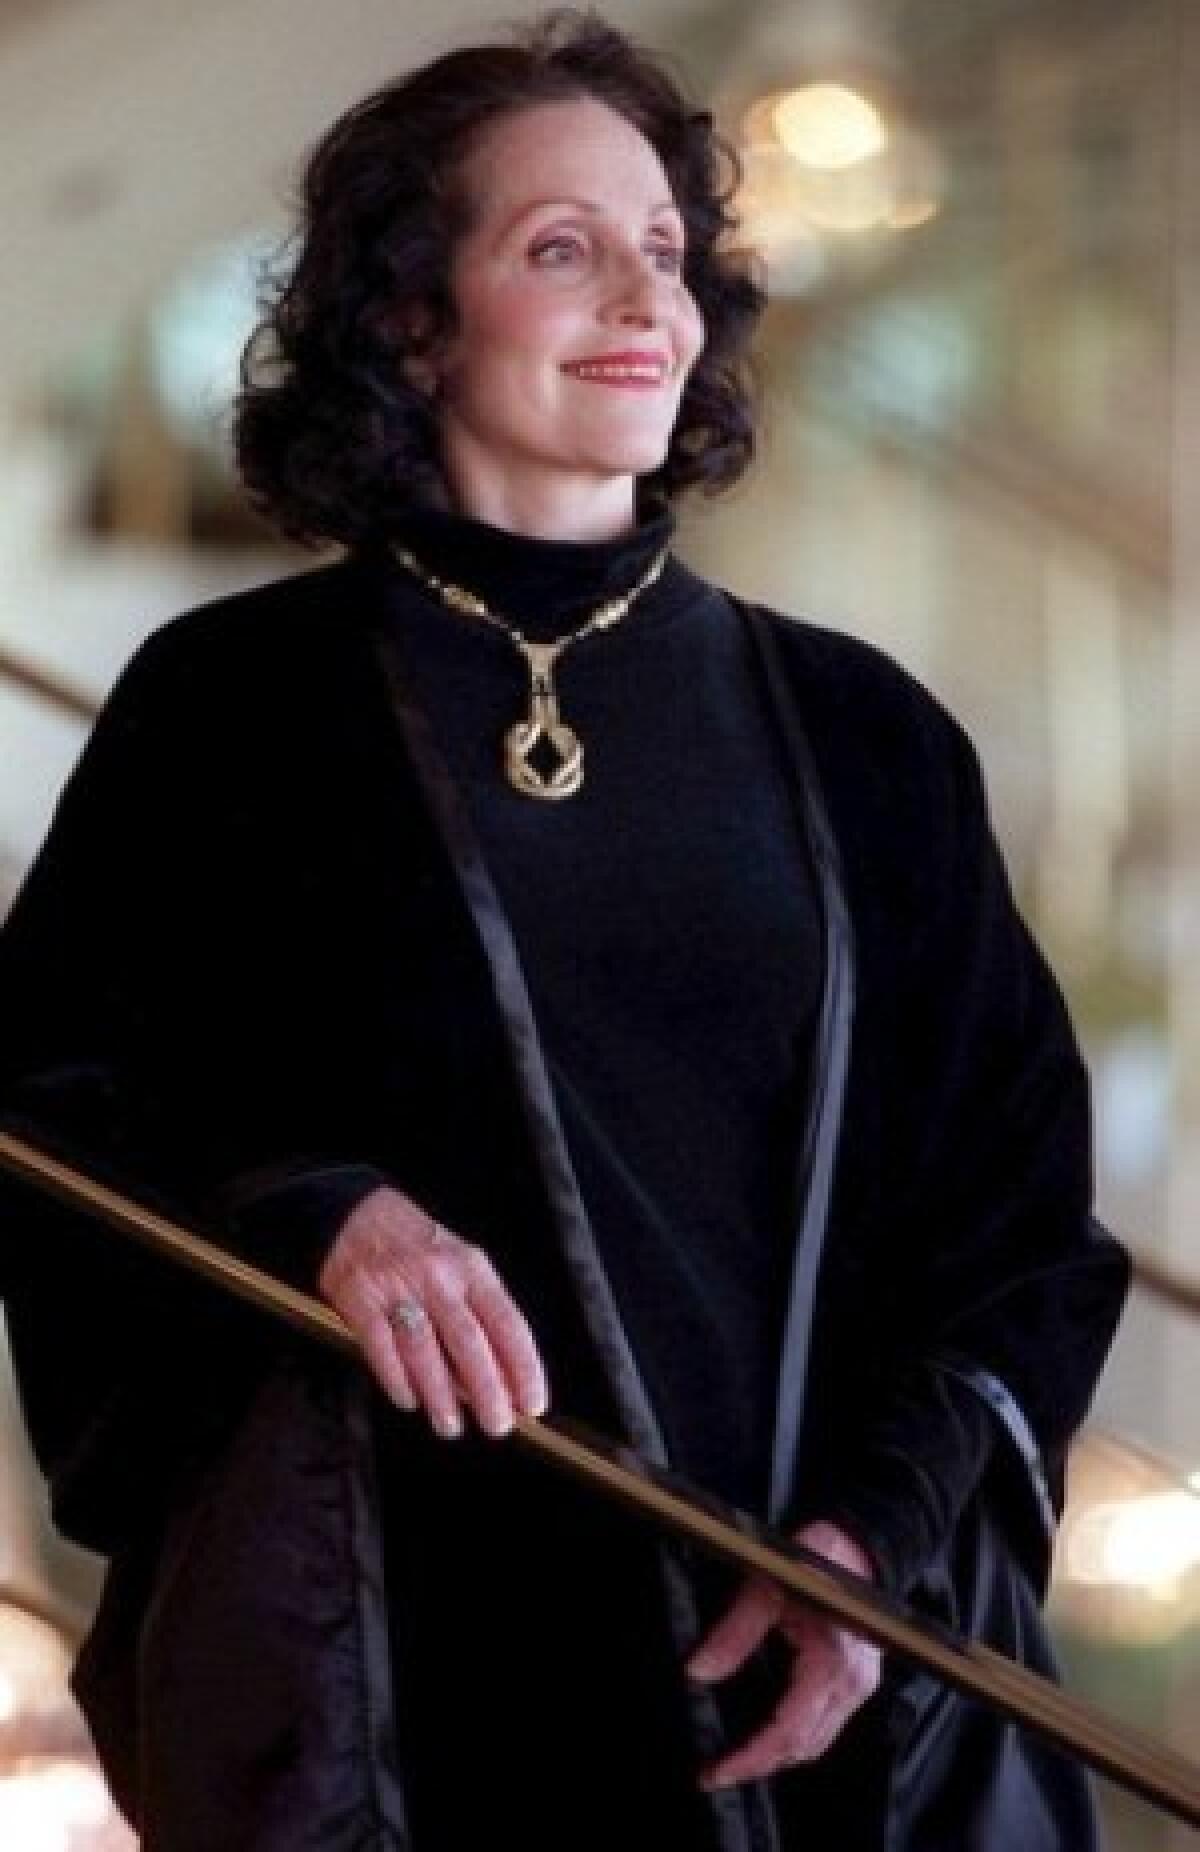 Hildegard Behrens, shown in 1998, was hailed as one of the finest Wagnerian performers of her generation. She performed in Los Angeles in 1998 and 2001.